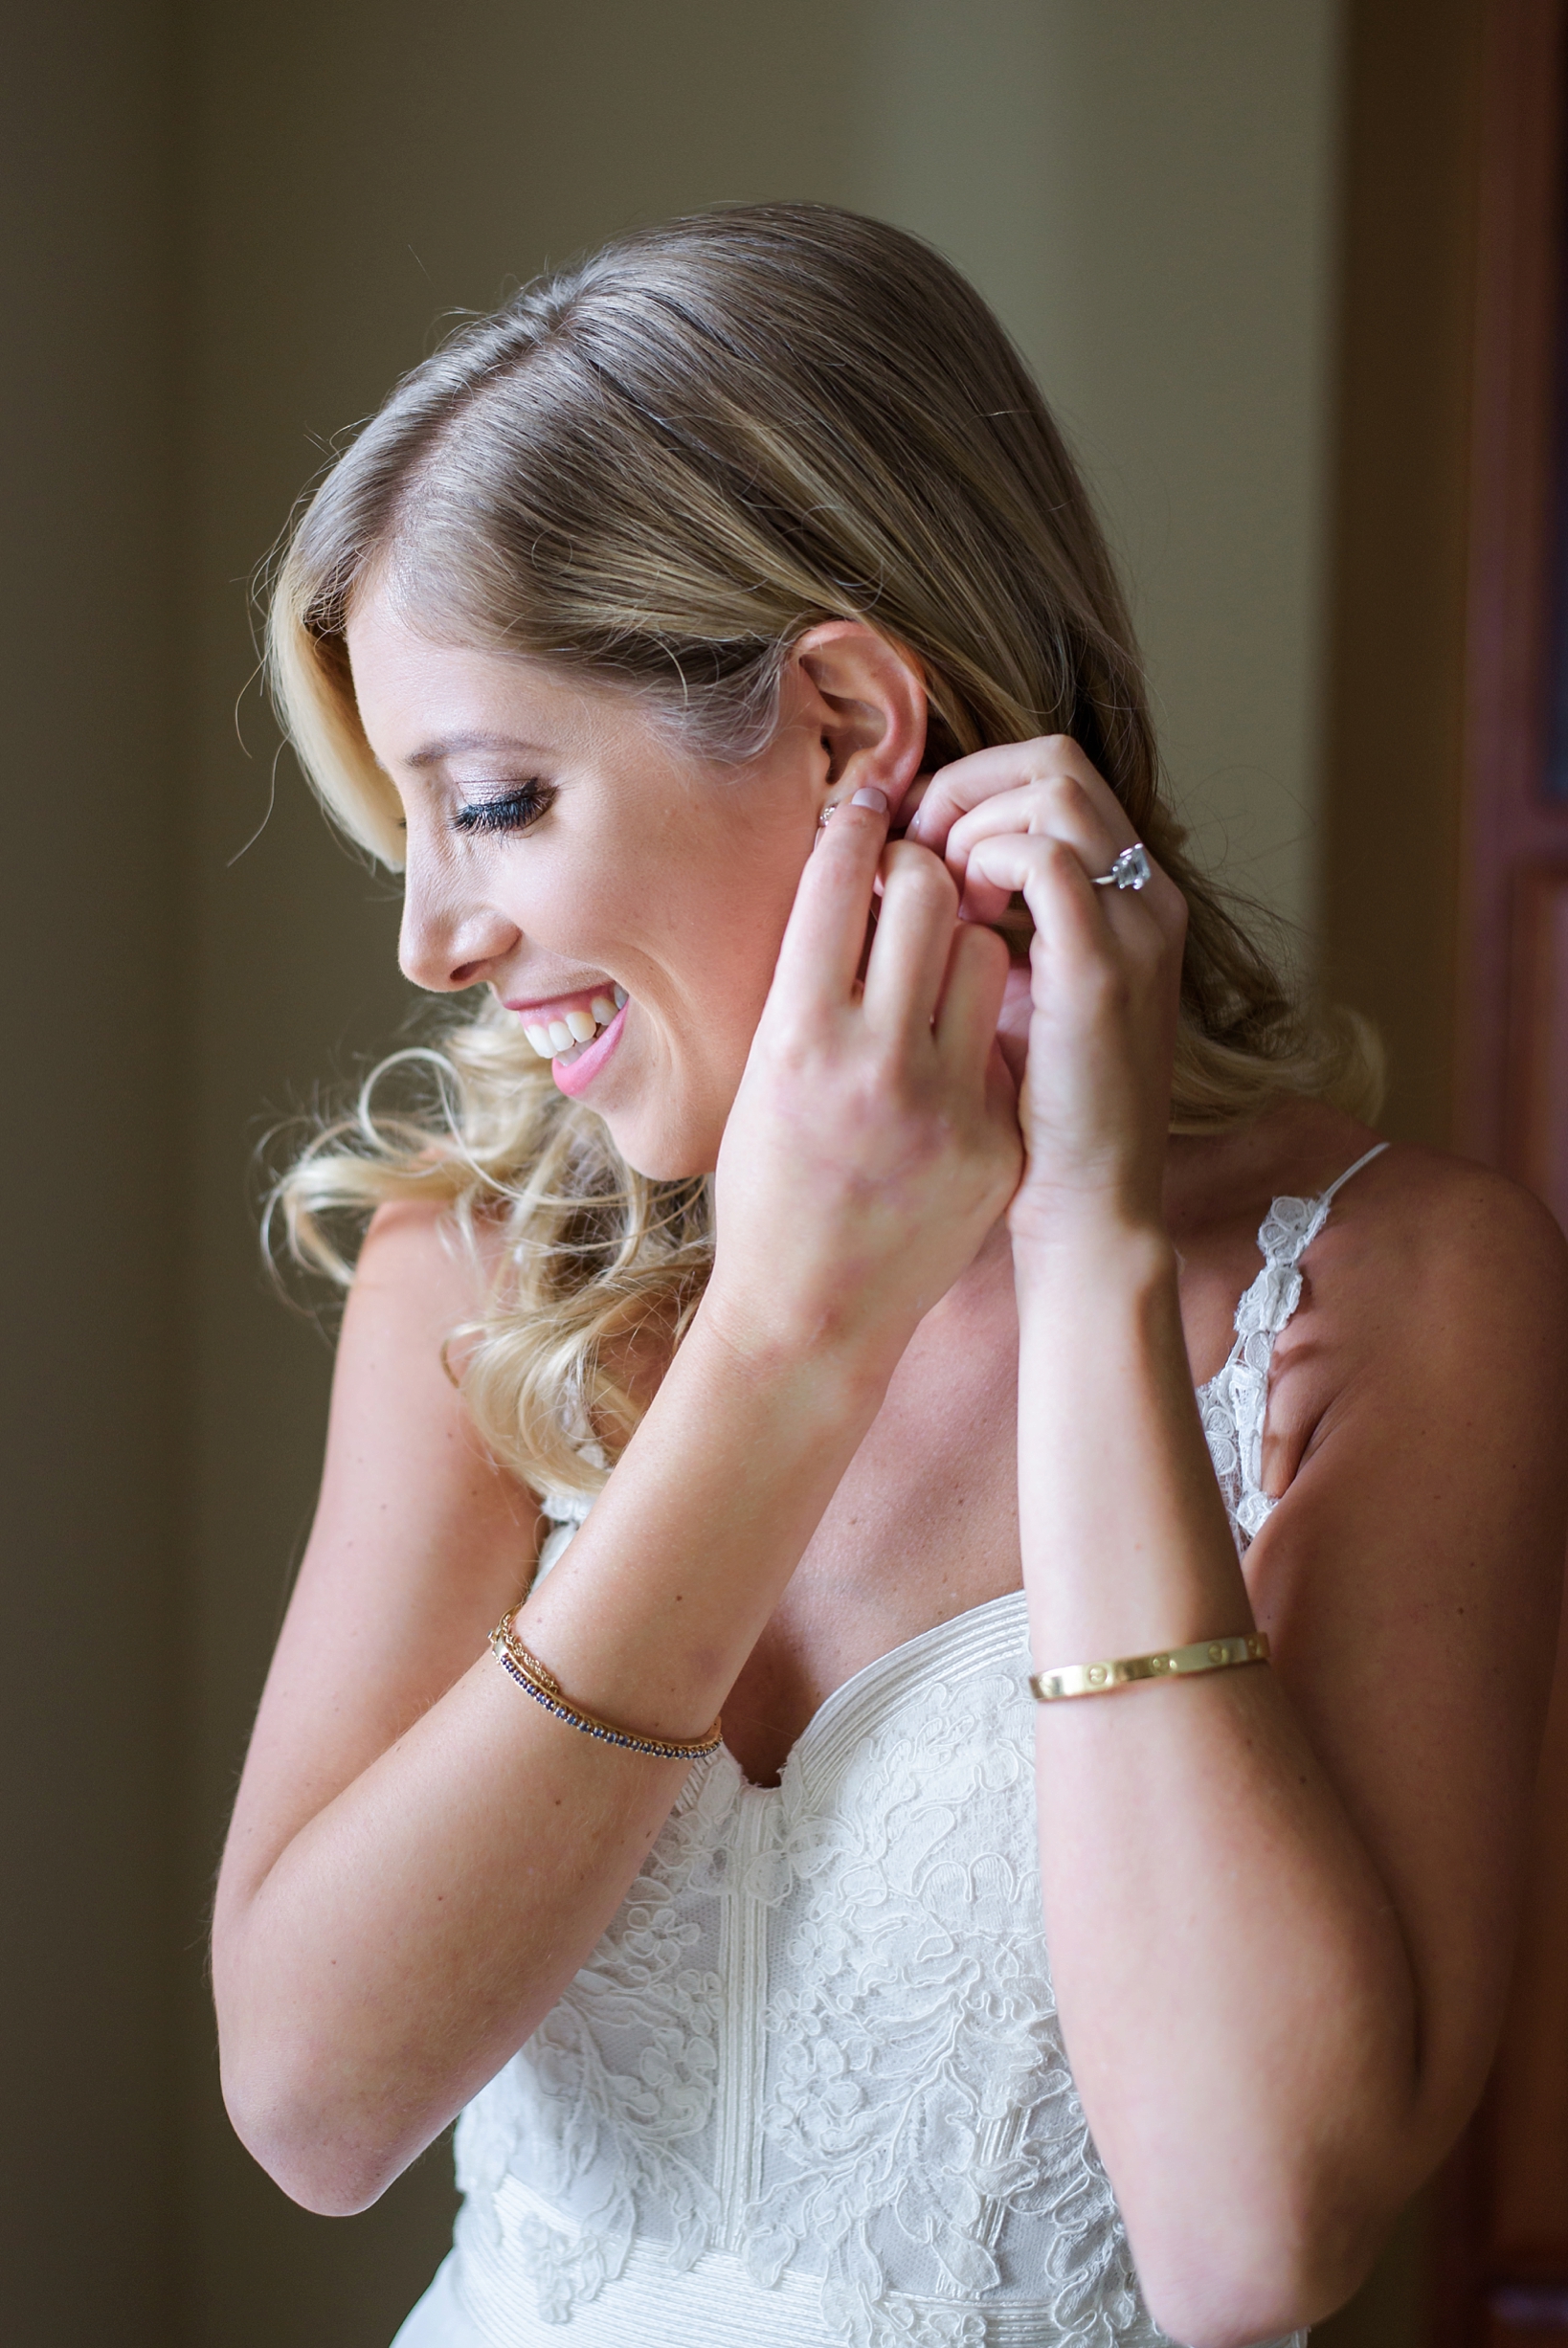 The bride putting her diamond stud earrings in her ears on her wedding day